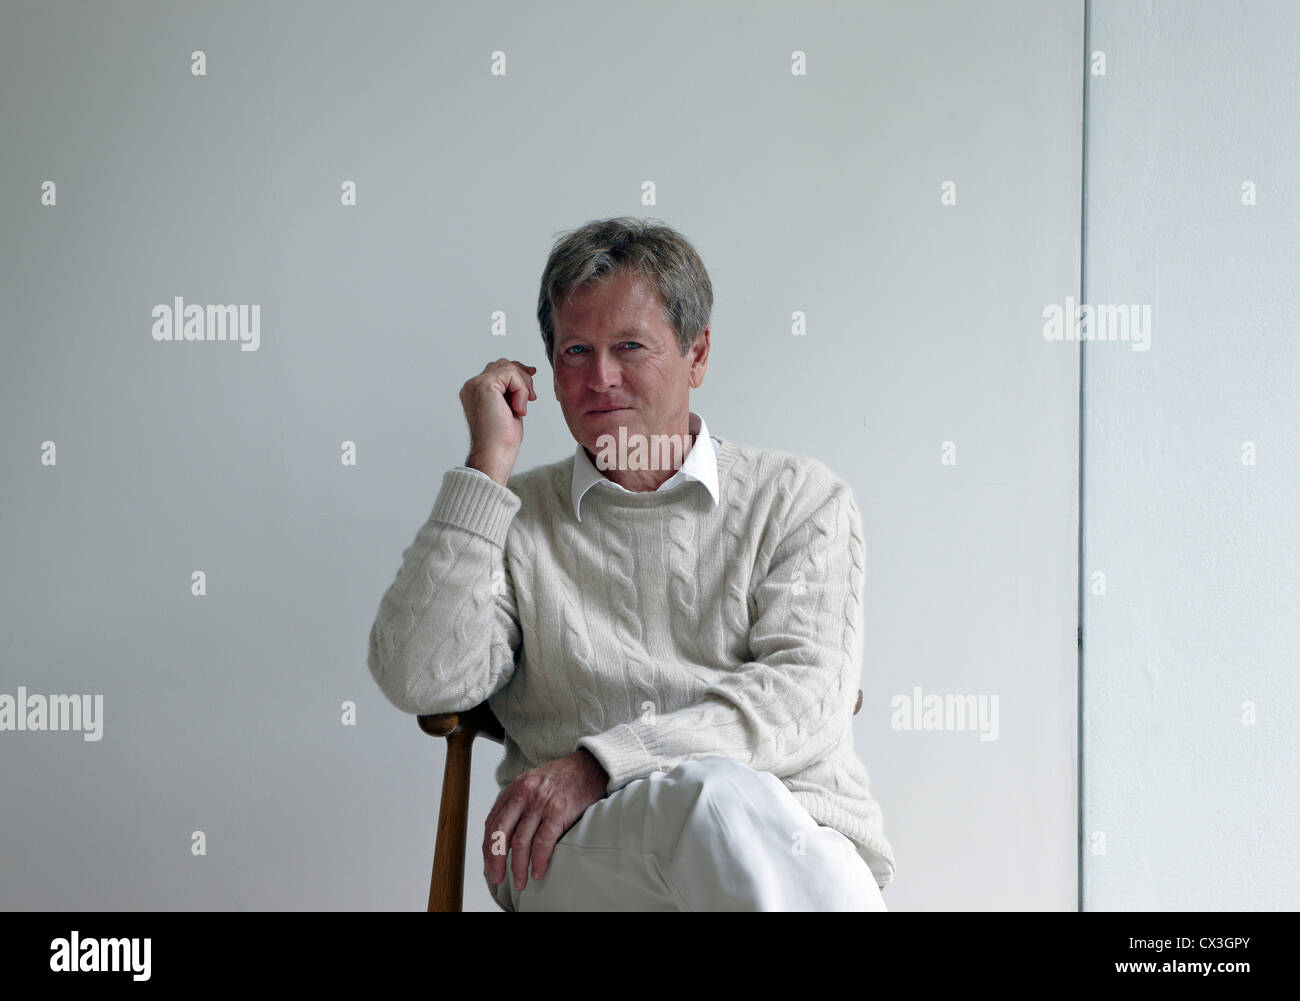 John Pawson at home, London, United Kingdom. Architect: John Pawson, 2010. Portrait of John Pawson sitting on a chair with one a Stock Photo